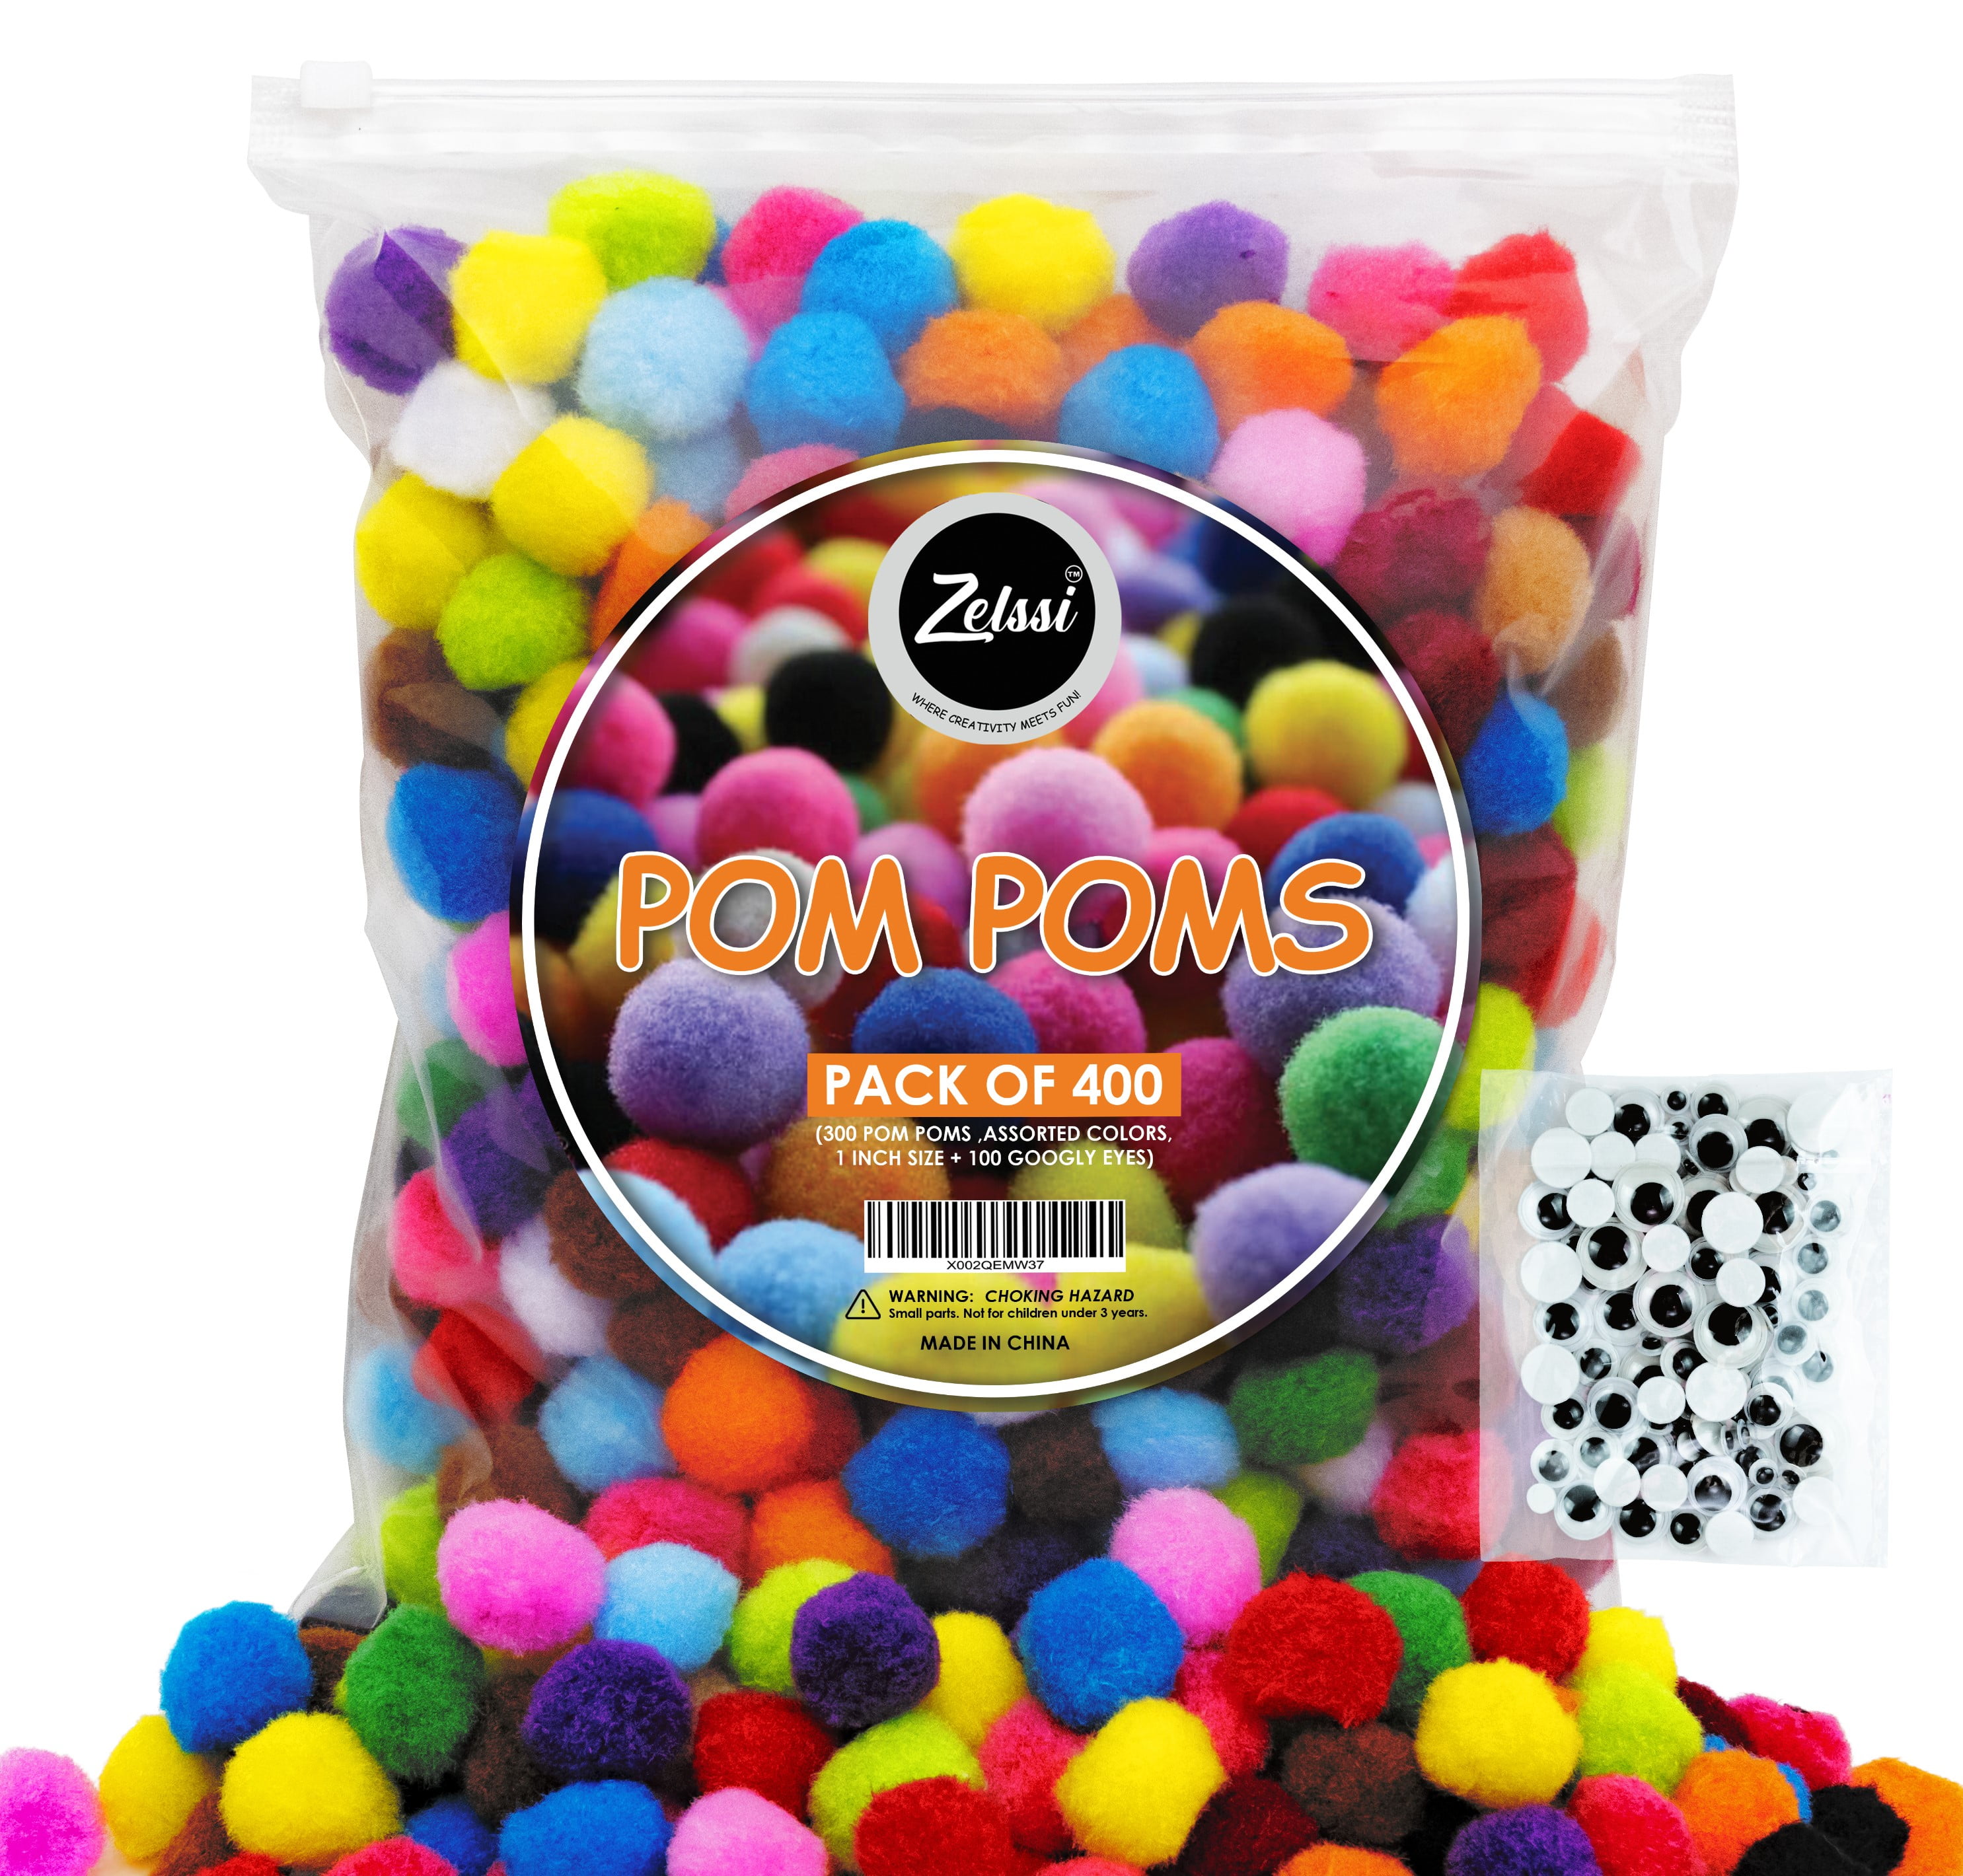 Zelssi Pom Poms - Pack of 1 300 1 inch Pom Pom Balls + 100 Googly Eyes -  Vibrant Assorted Pompoms for Crafts Multi Colored Poms for DIY & Arts and  Creative Crafts Projects & Decorations